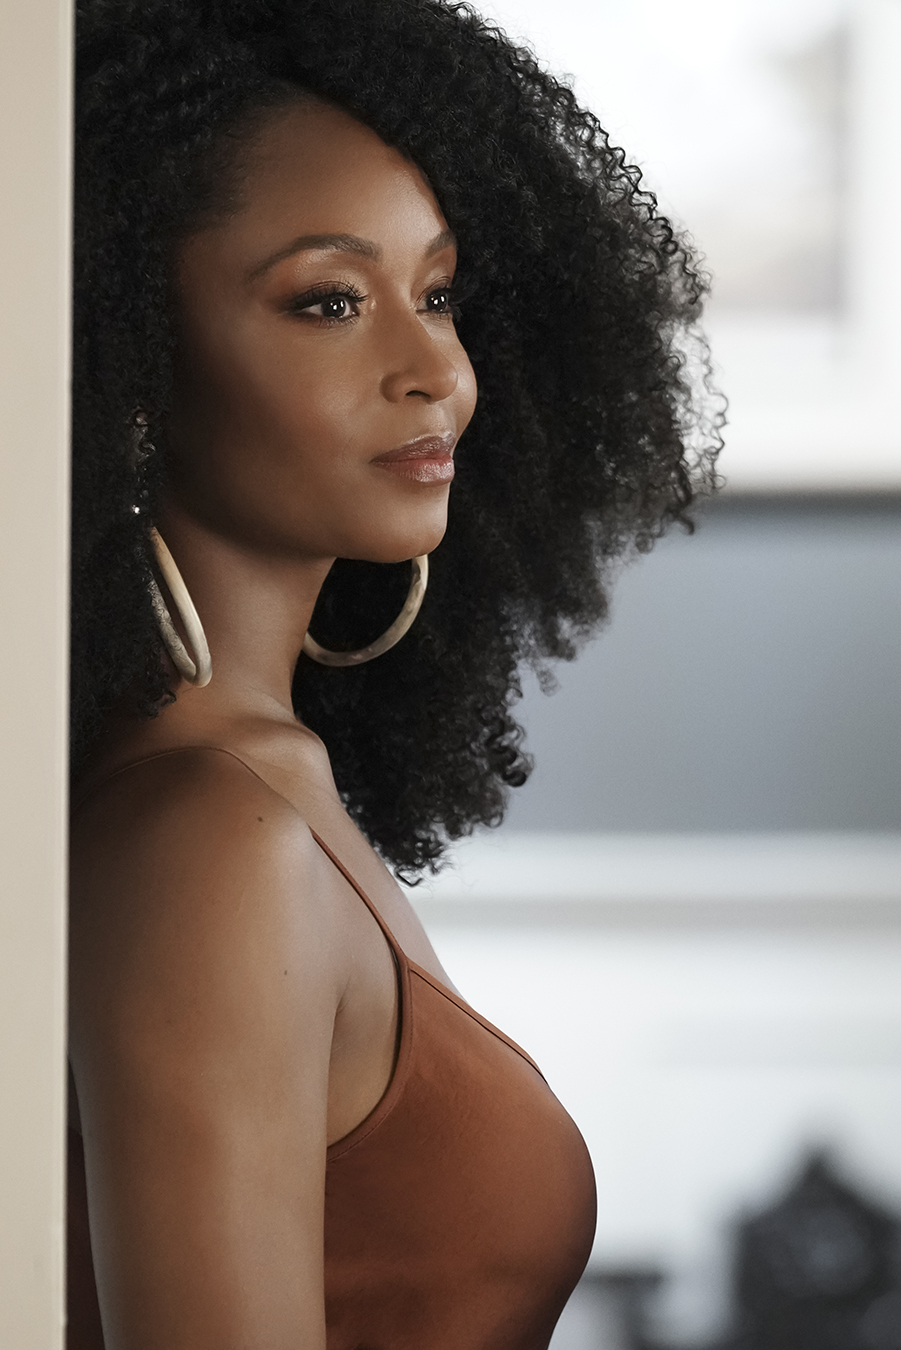 Yaya DaCosta: 25 Things You Don’t Know About Me.